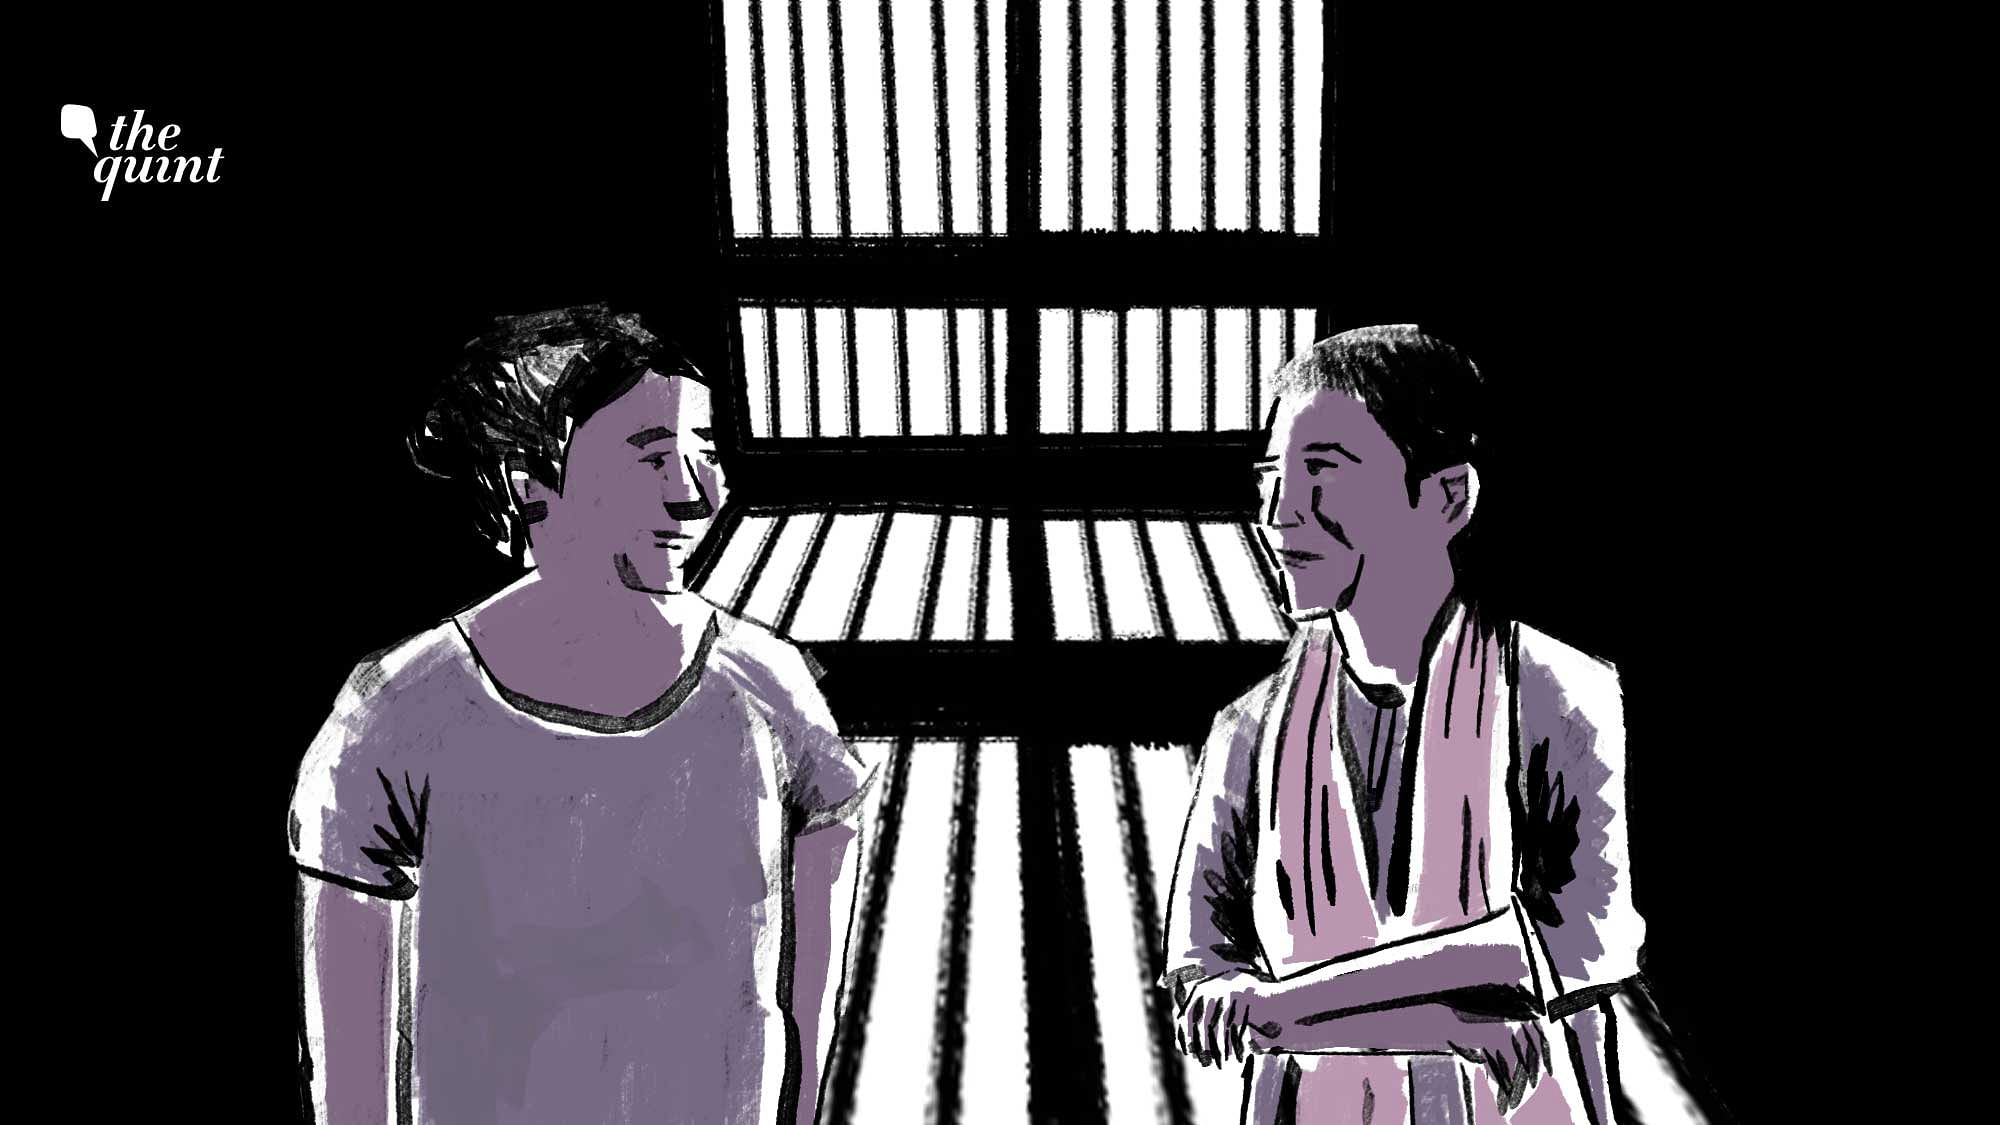 They can put you behind bars, <i>saathi</i>. But they will never break you, write Araria activists Tanmay and Kalyani.